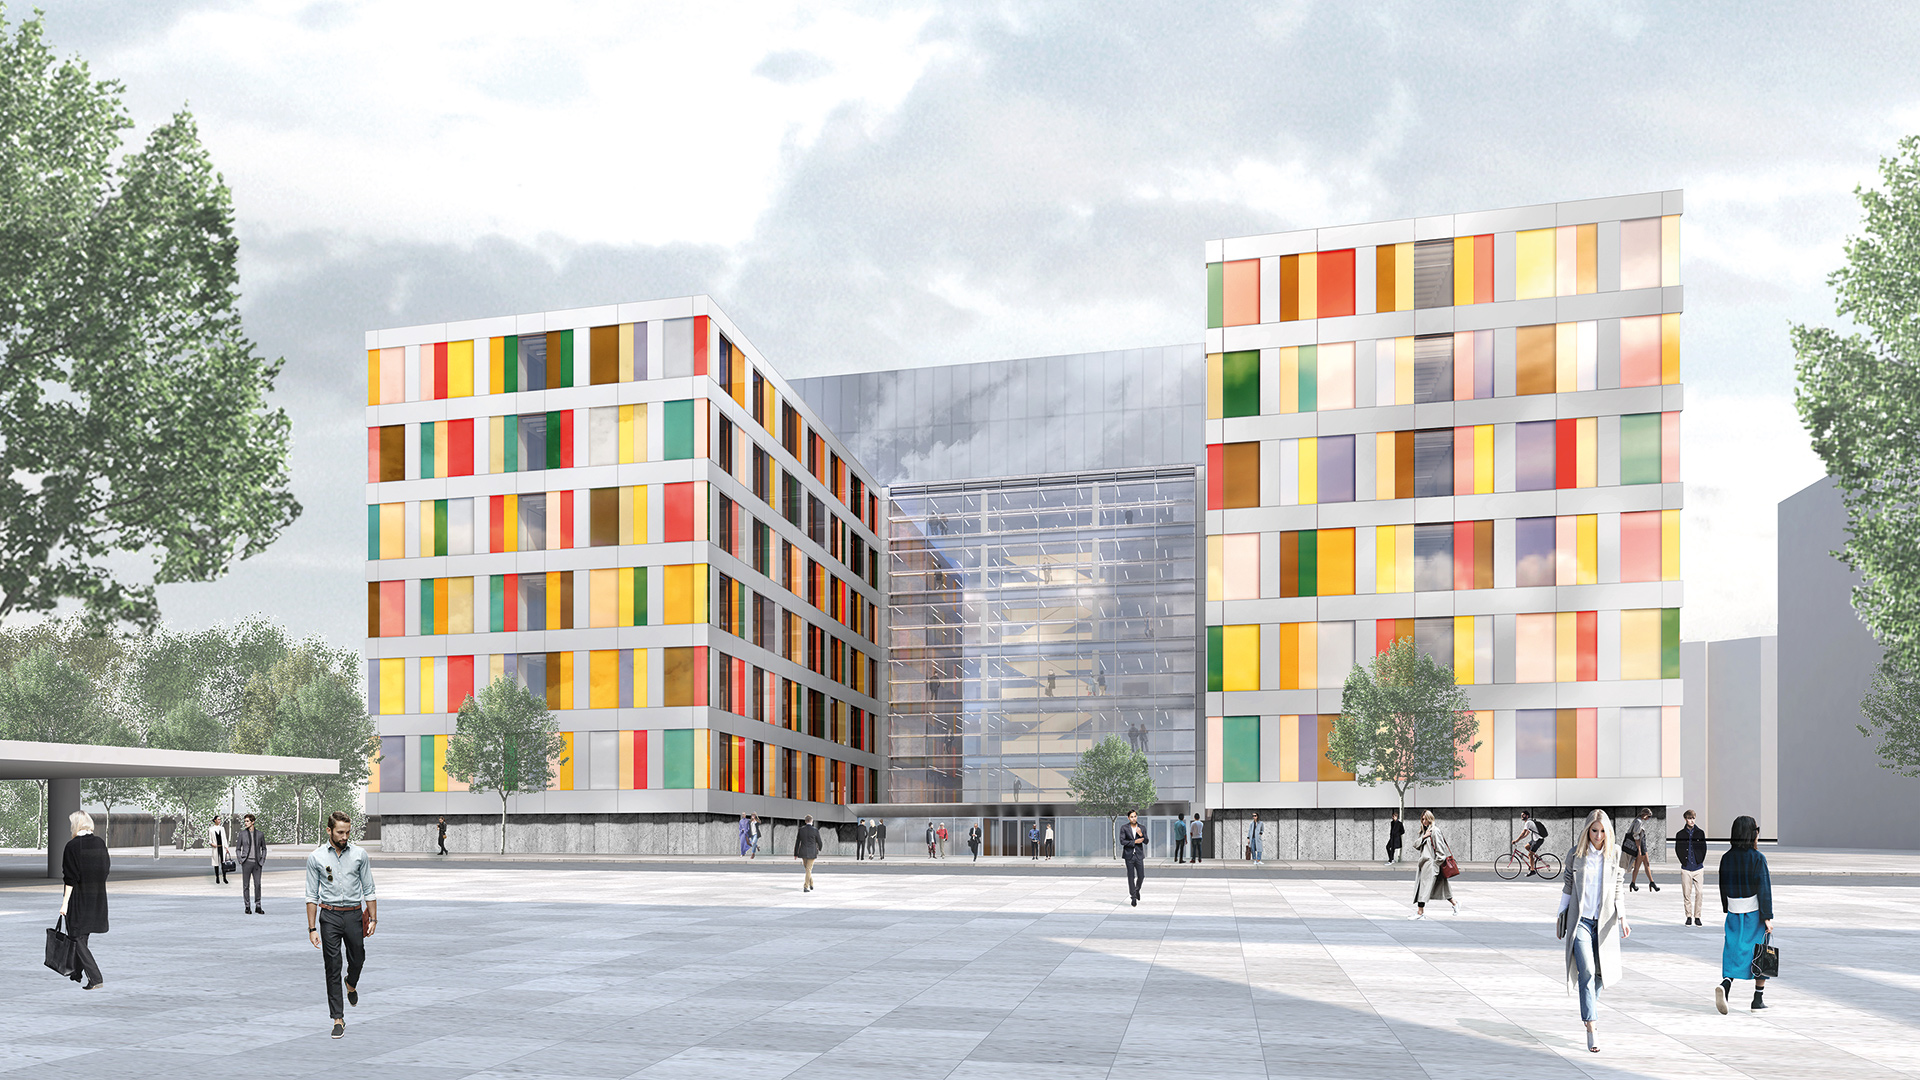 A computer-generated image showing the multicolored panels on the Luisenblock West’s facade.